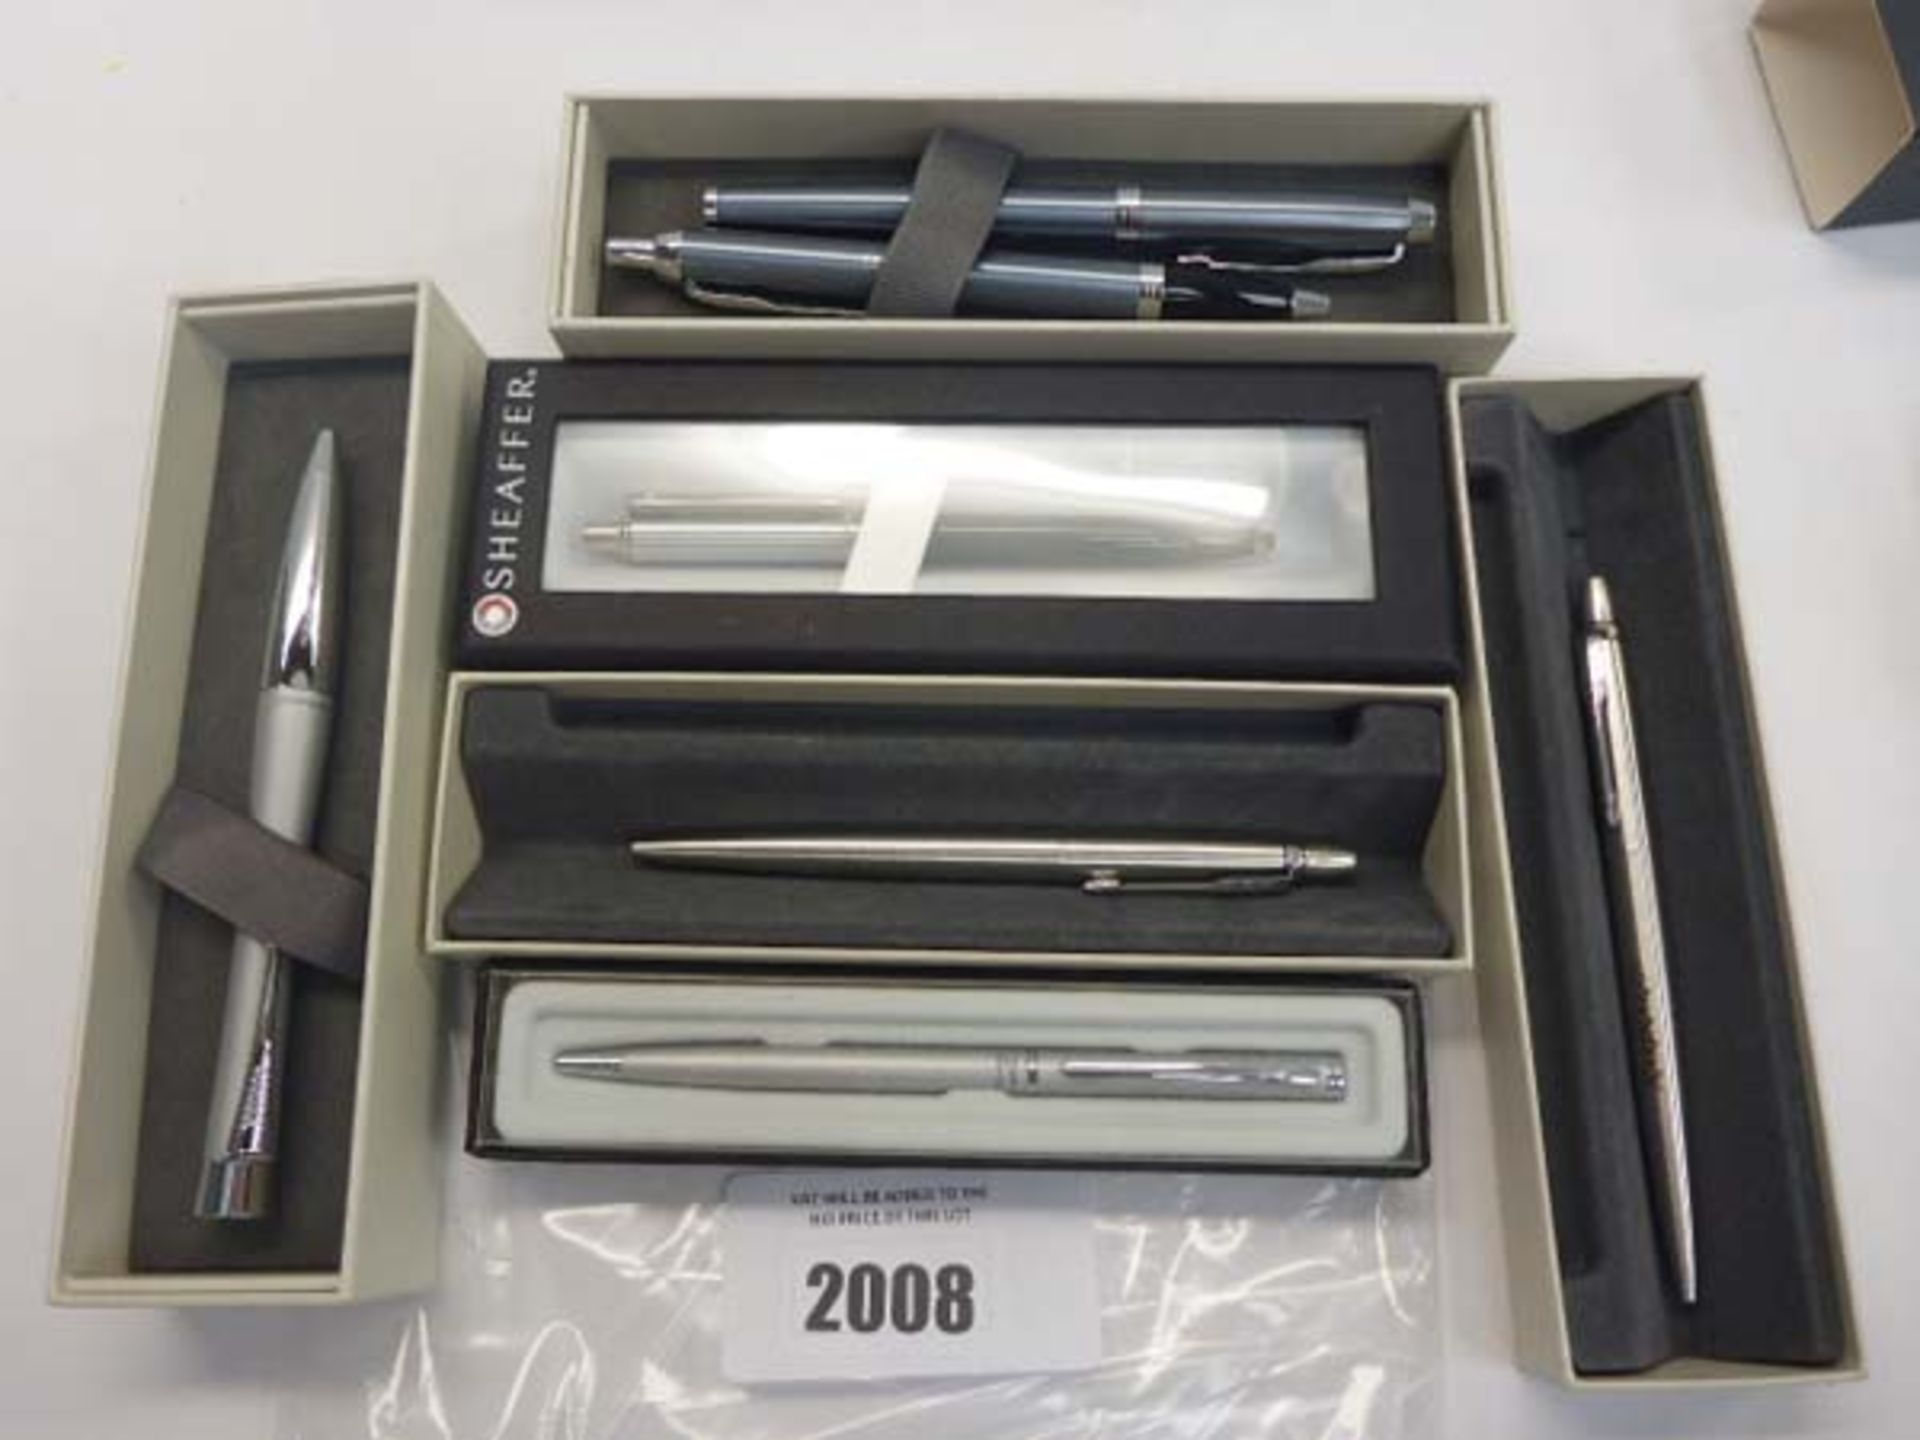 4 Parker ballpoint pents (3 with custom engravings), Sheaffer pen and one other